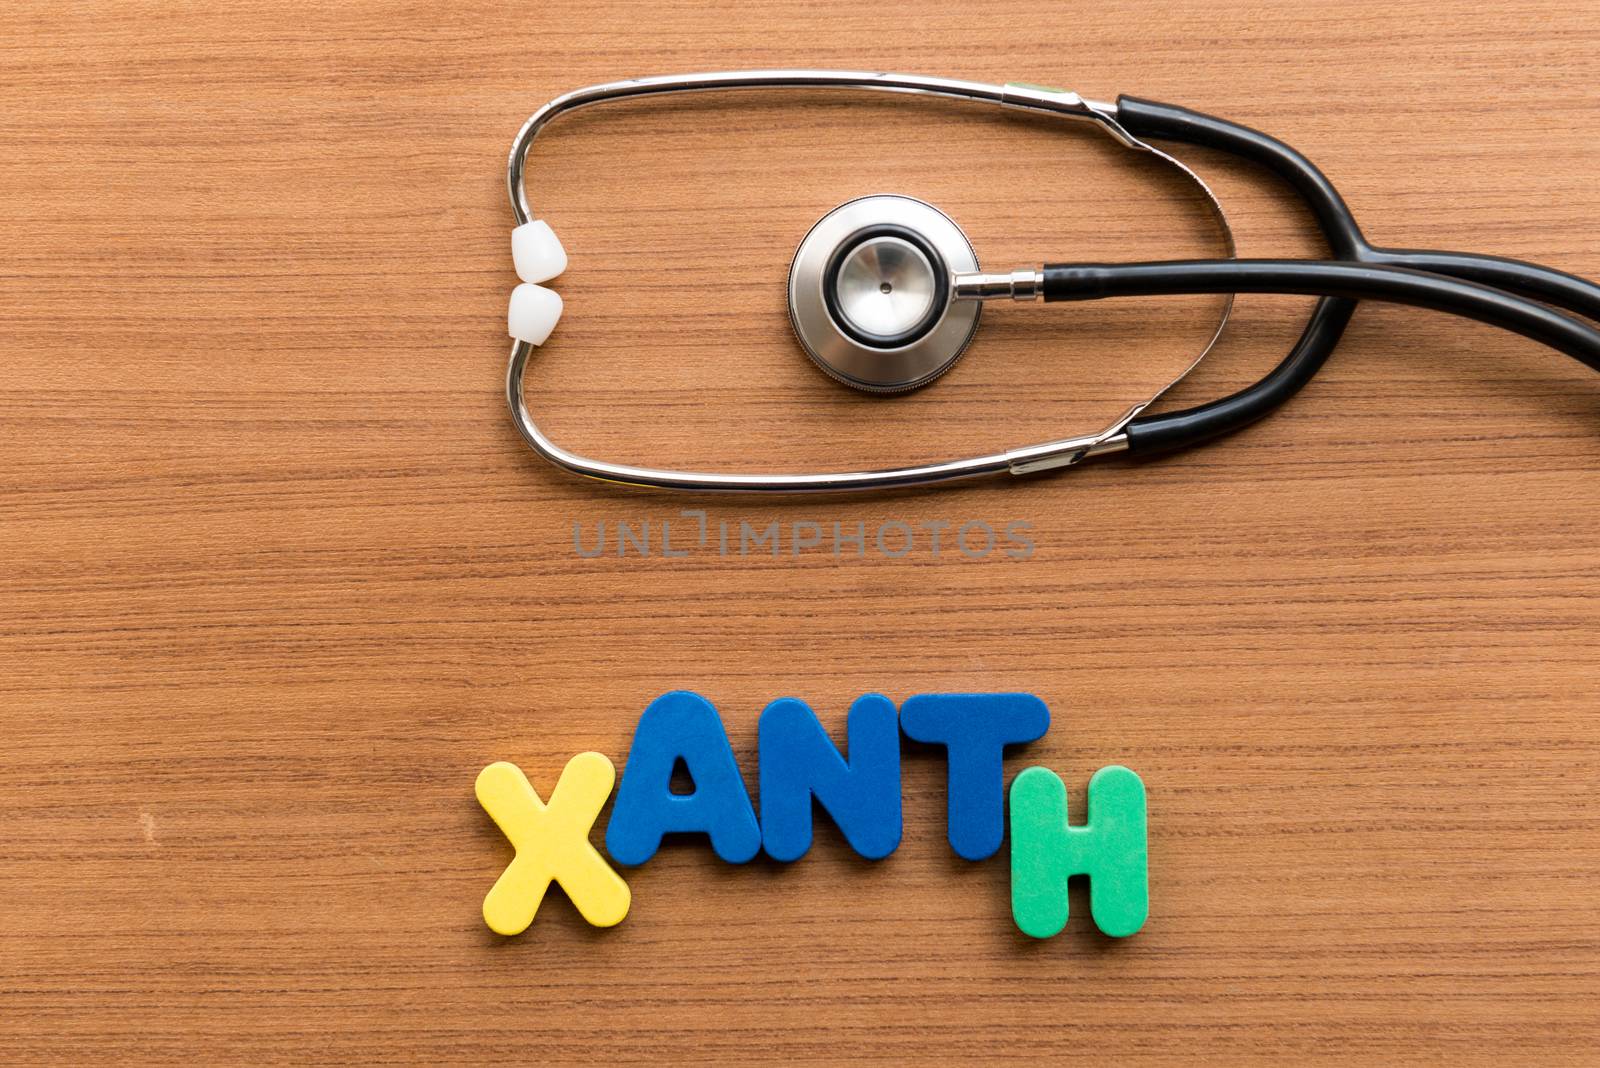 xanth colorful word with stethoscope by sohel.parvez@hotmail.com